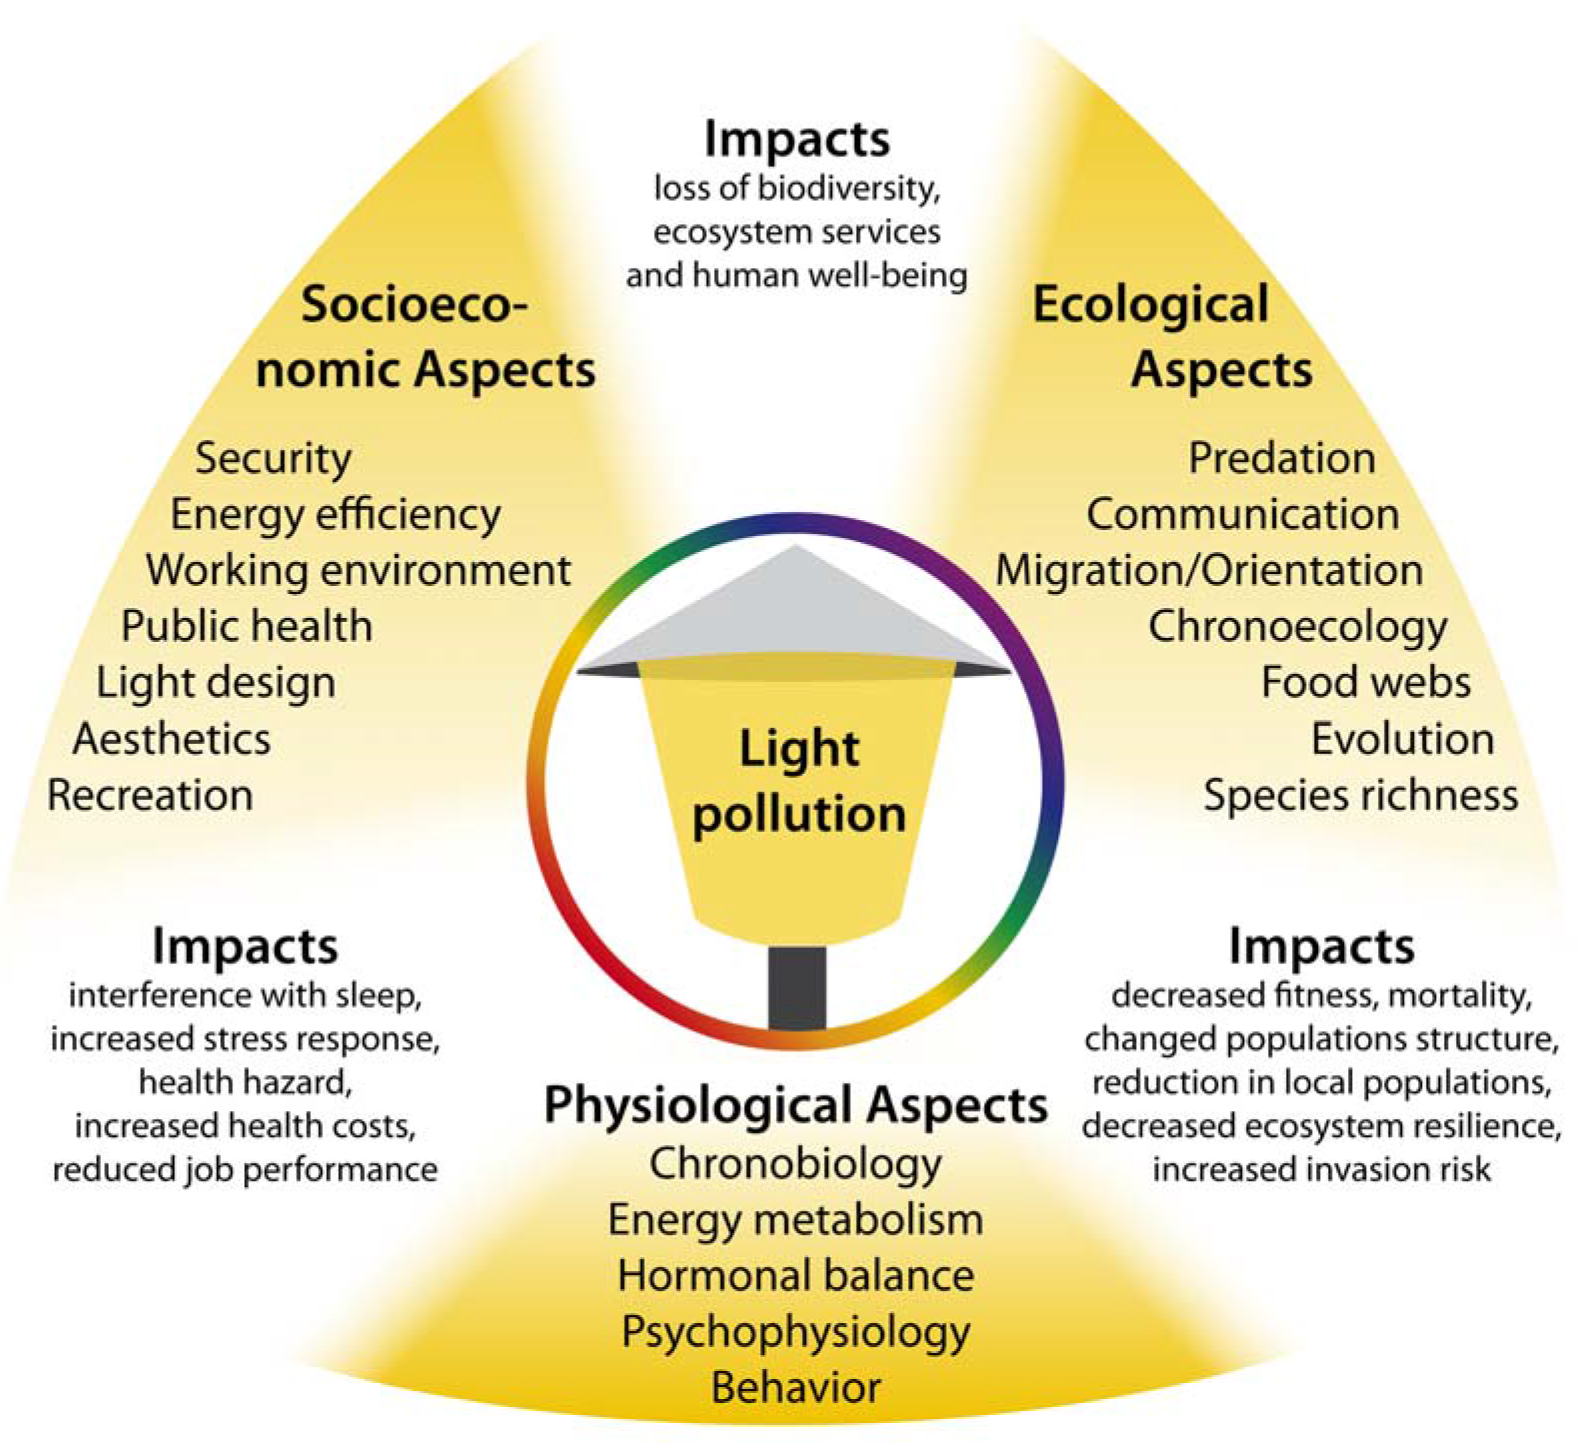 Light Pollution Chart: Impacts of Socioeconomic, Ecological, and Physiological aspects